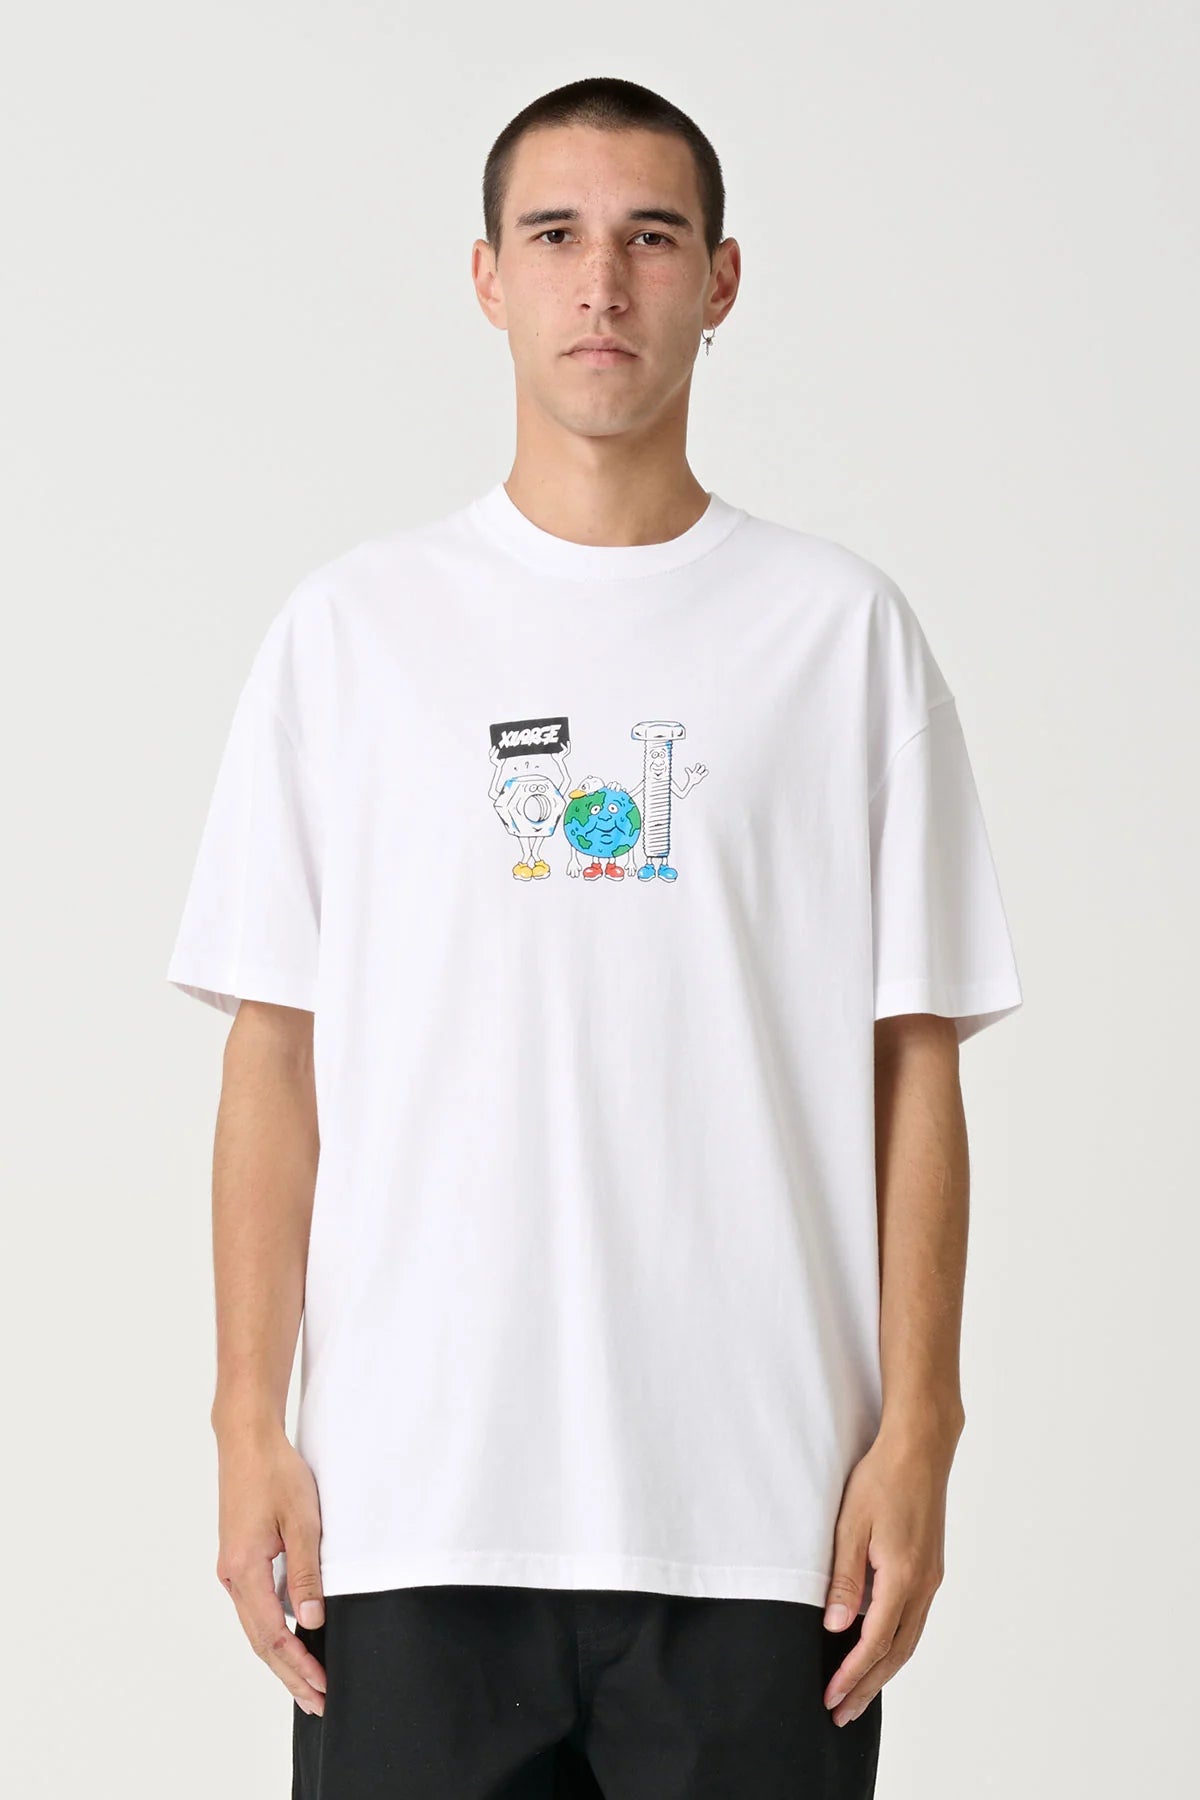 XLARGE Trio Mens Tee - Solid White